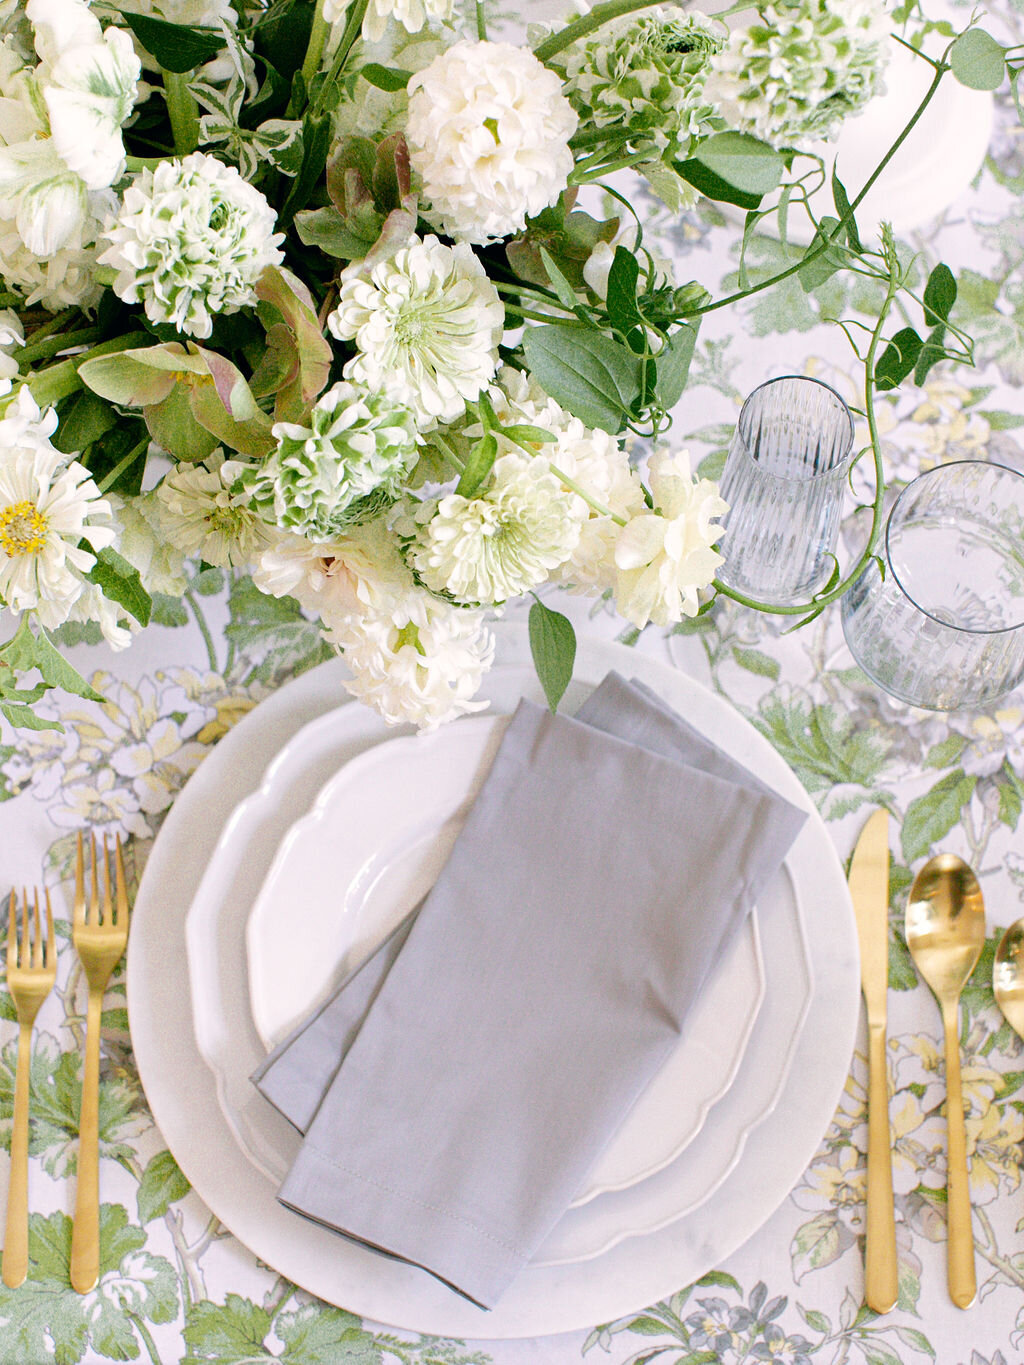 max-owens-design-english-floral-wedding-20-place-setting